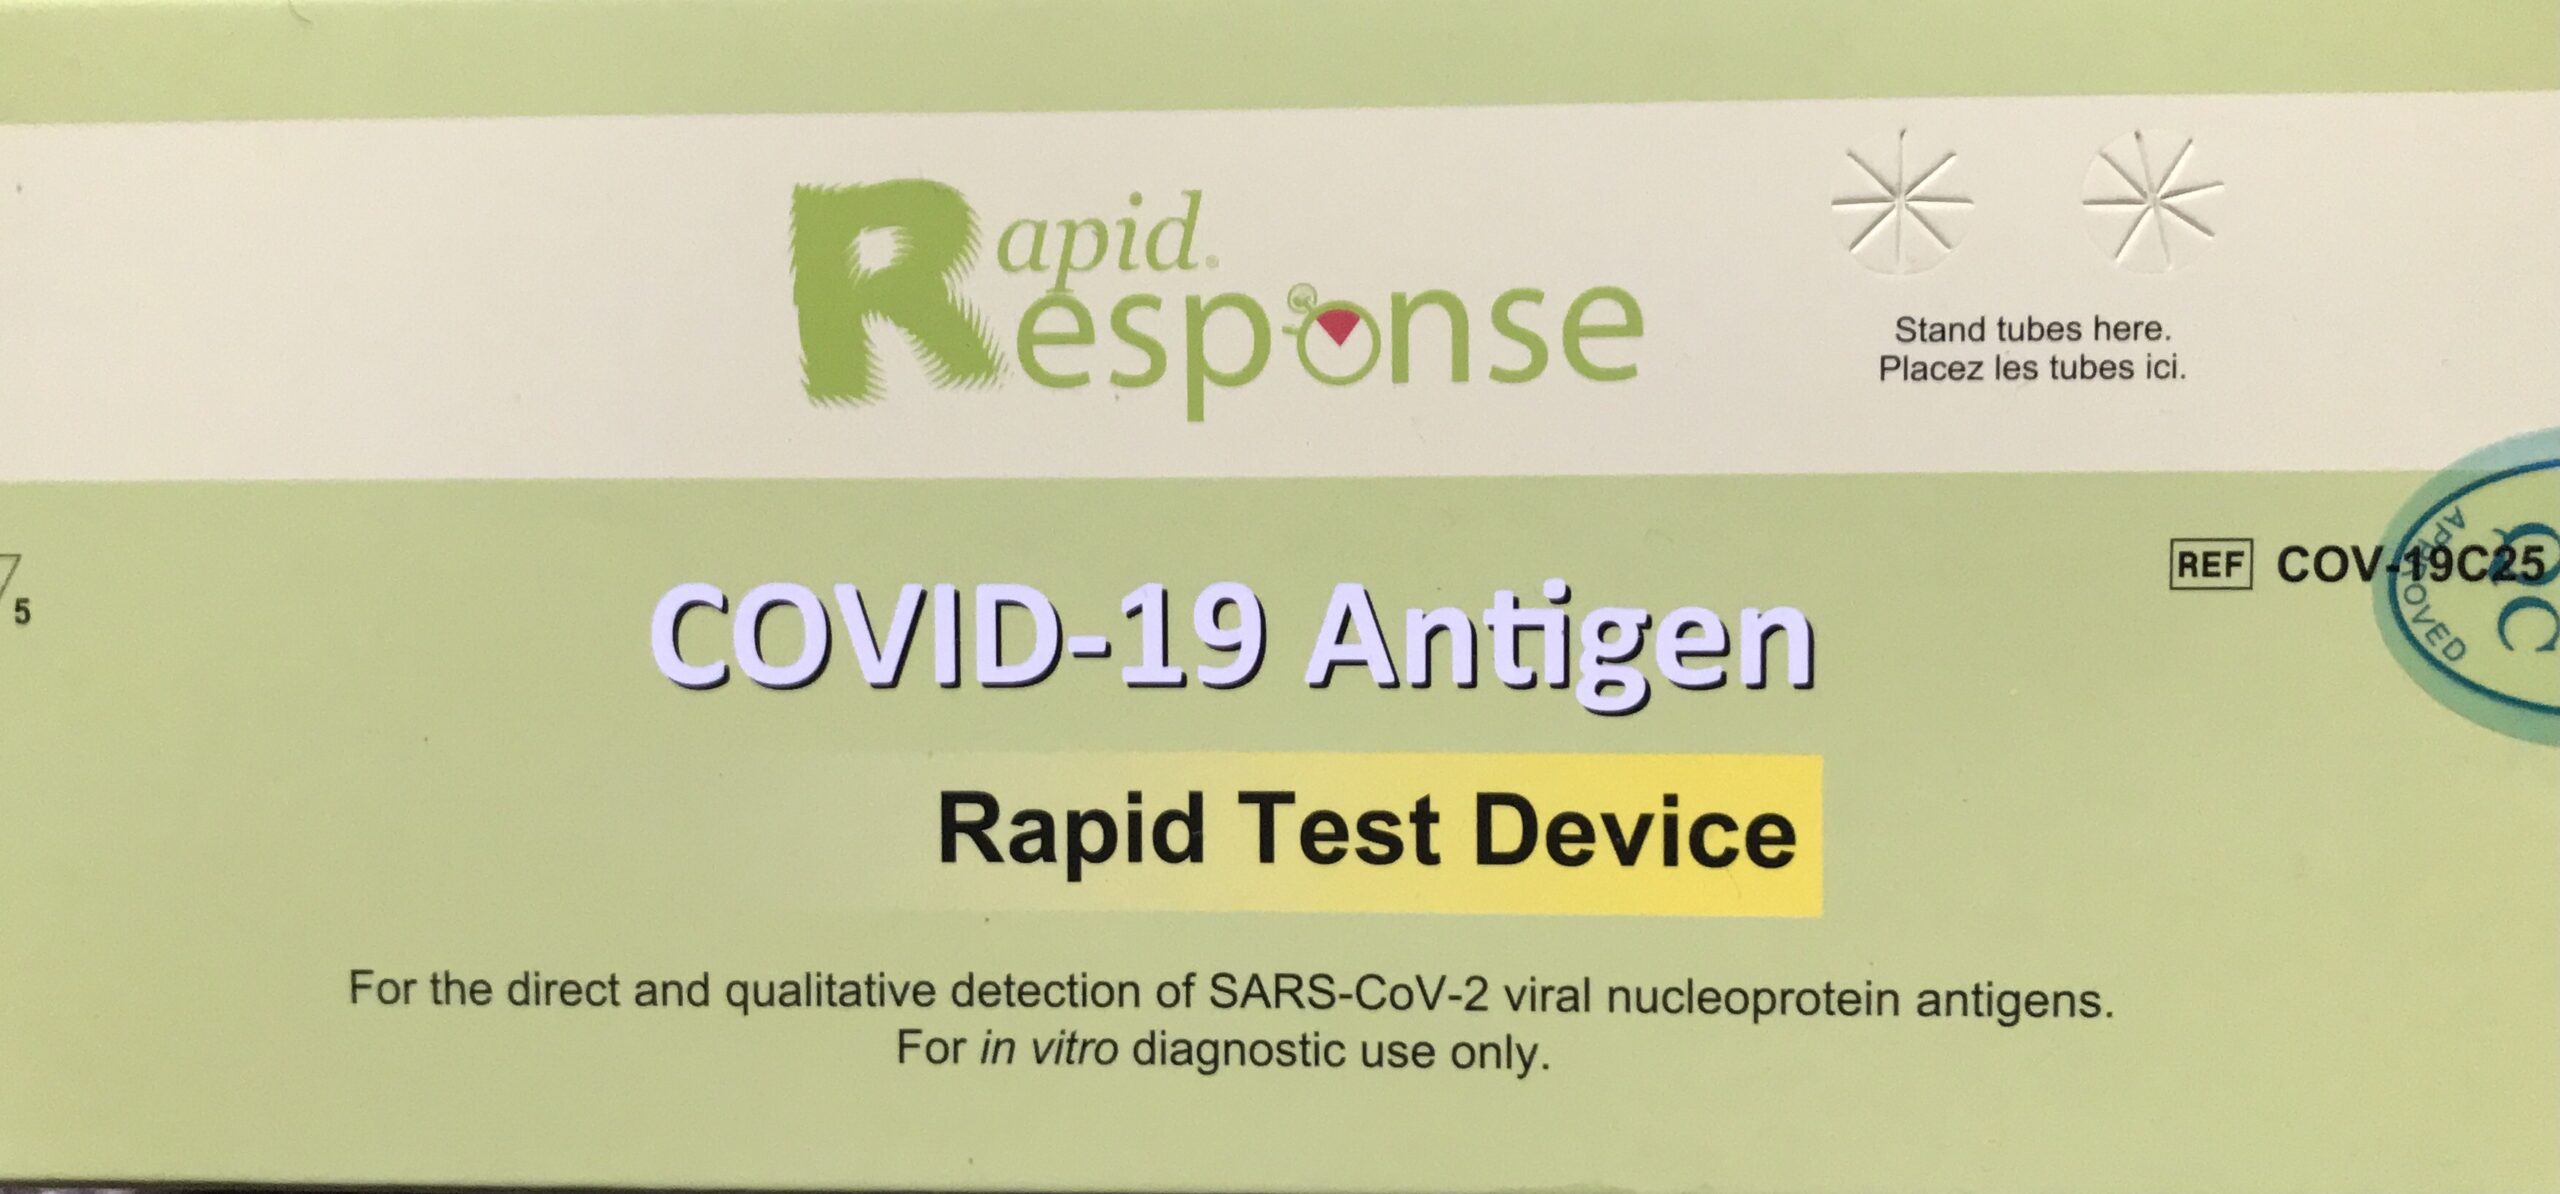 Rapid Antigen Test at Chaparral Pharmacy scaled